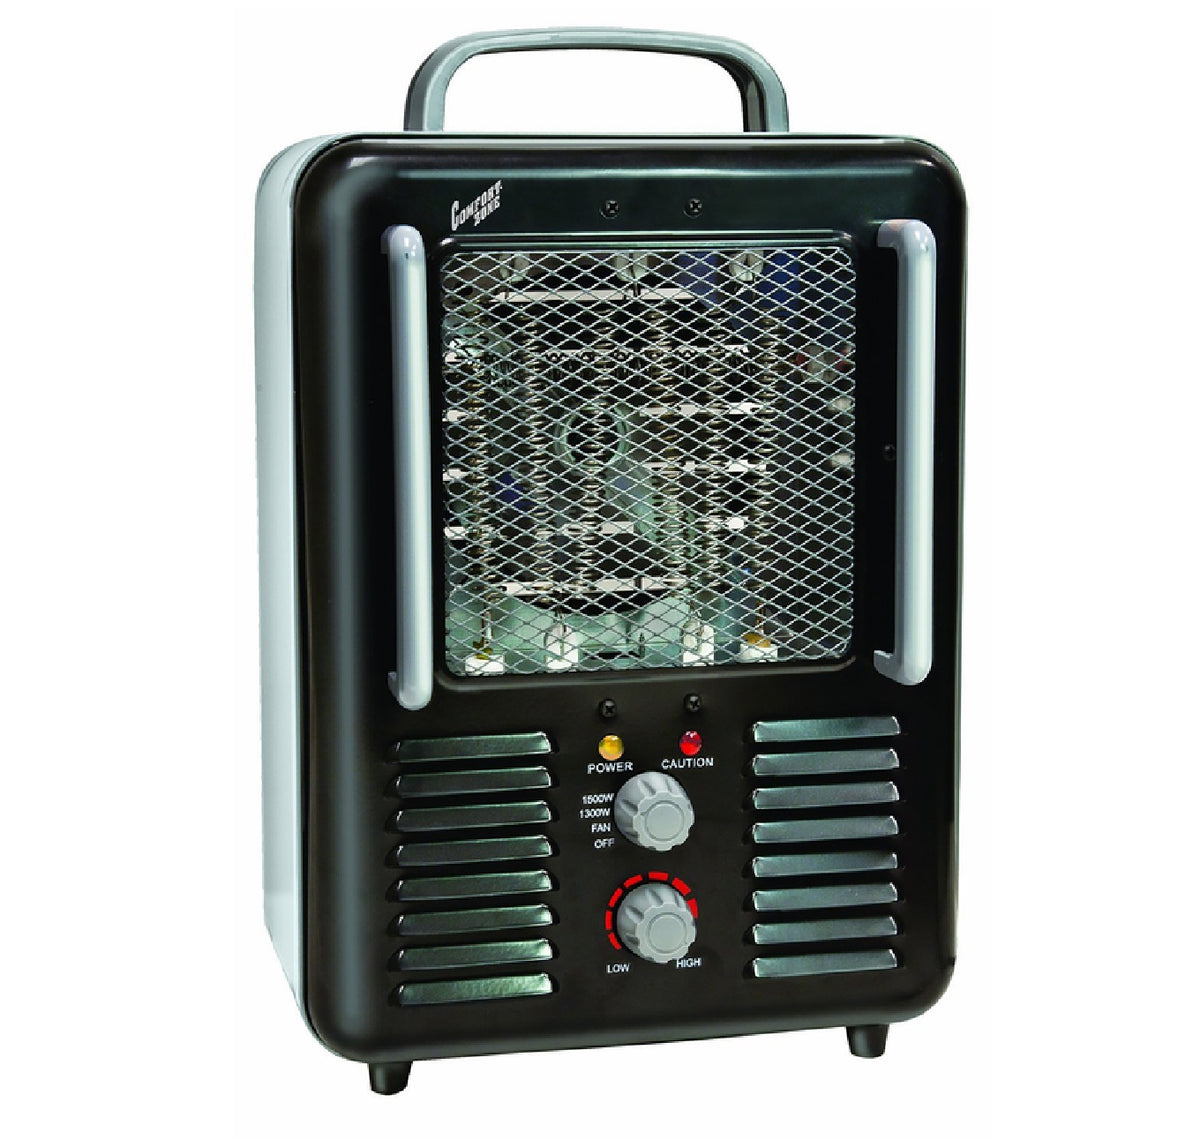 buy electric heaters at cheap rate in bulk. wholesale & retail heat & cooling appliances store.